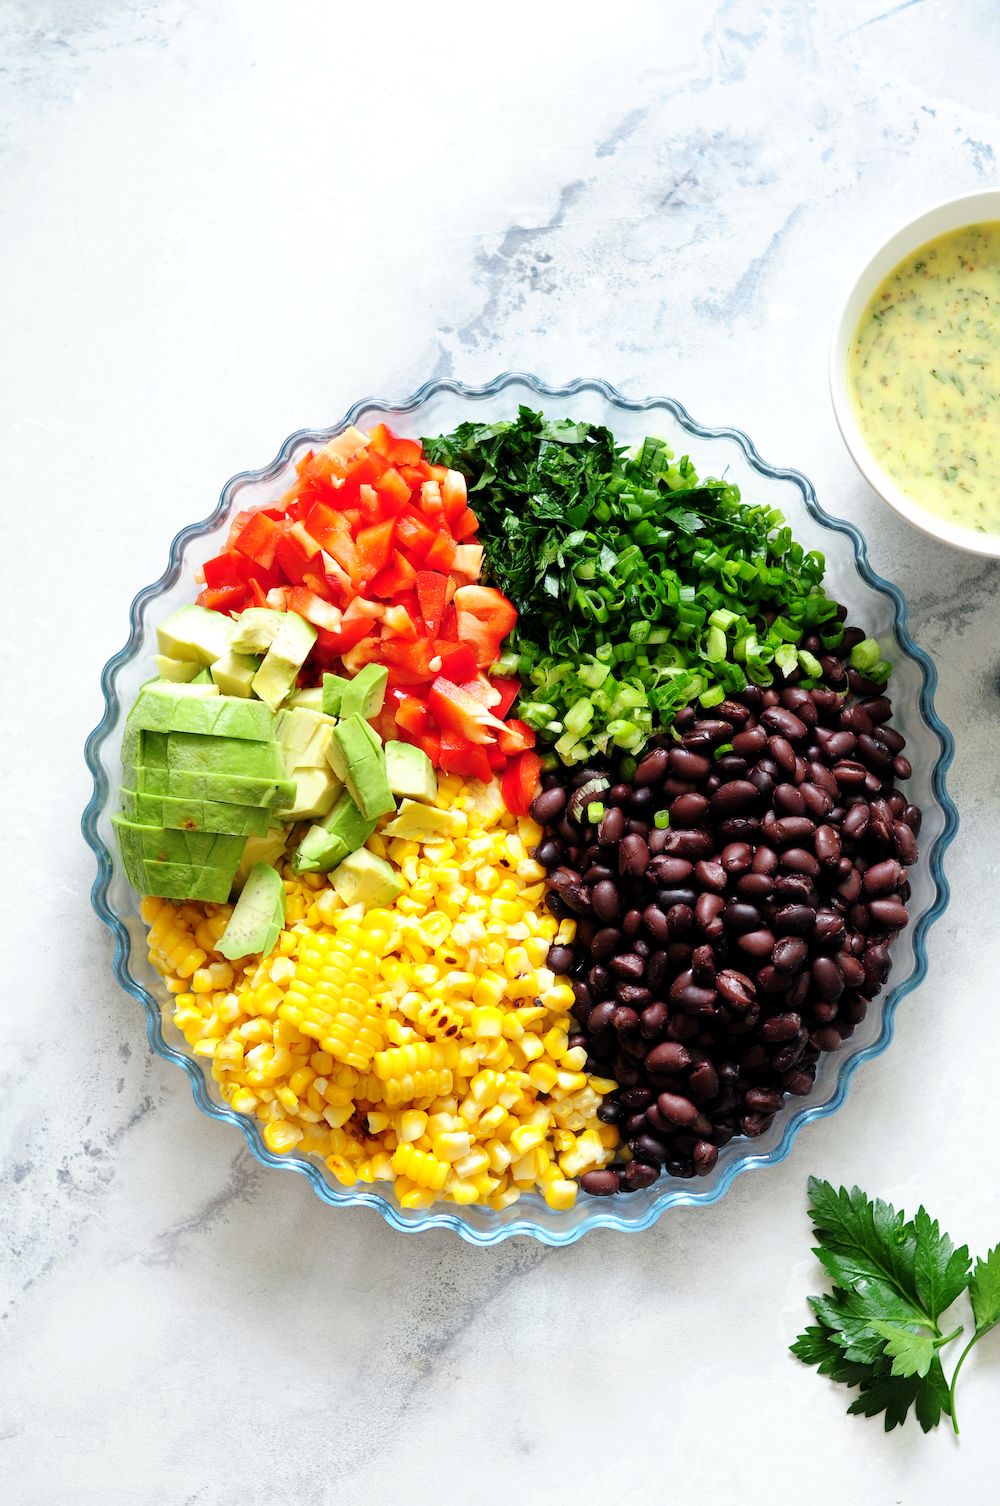 Ingredients for Corn and Black Bean Salad 